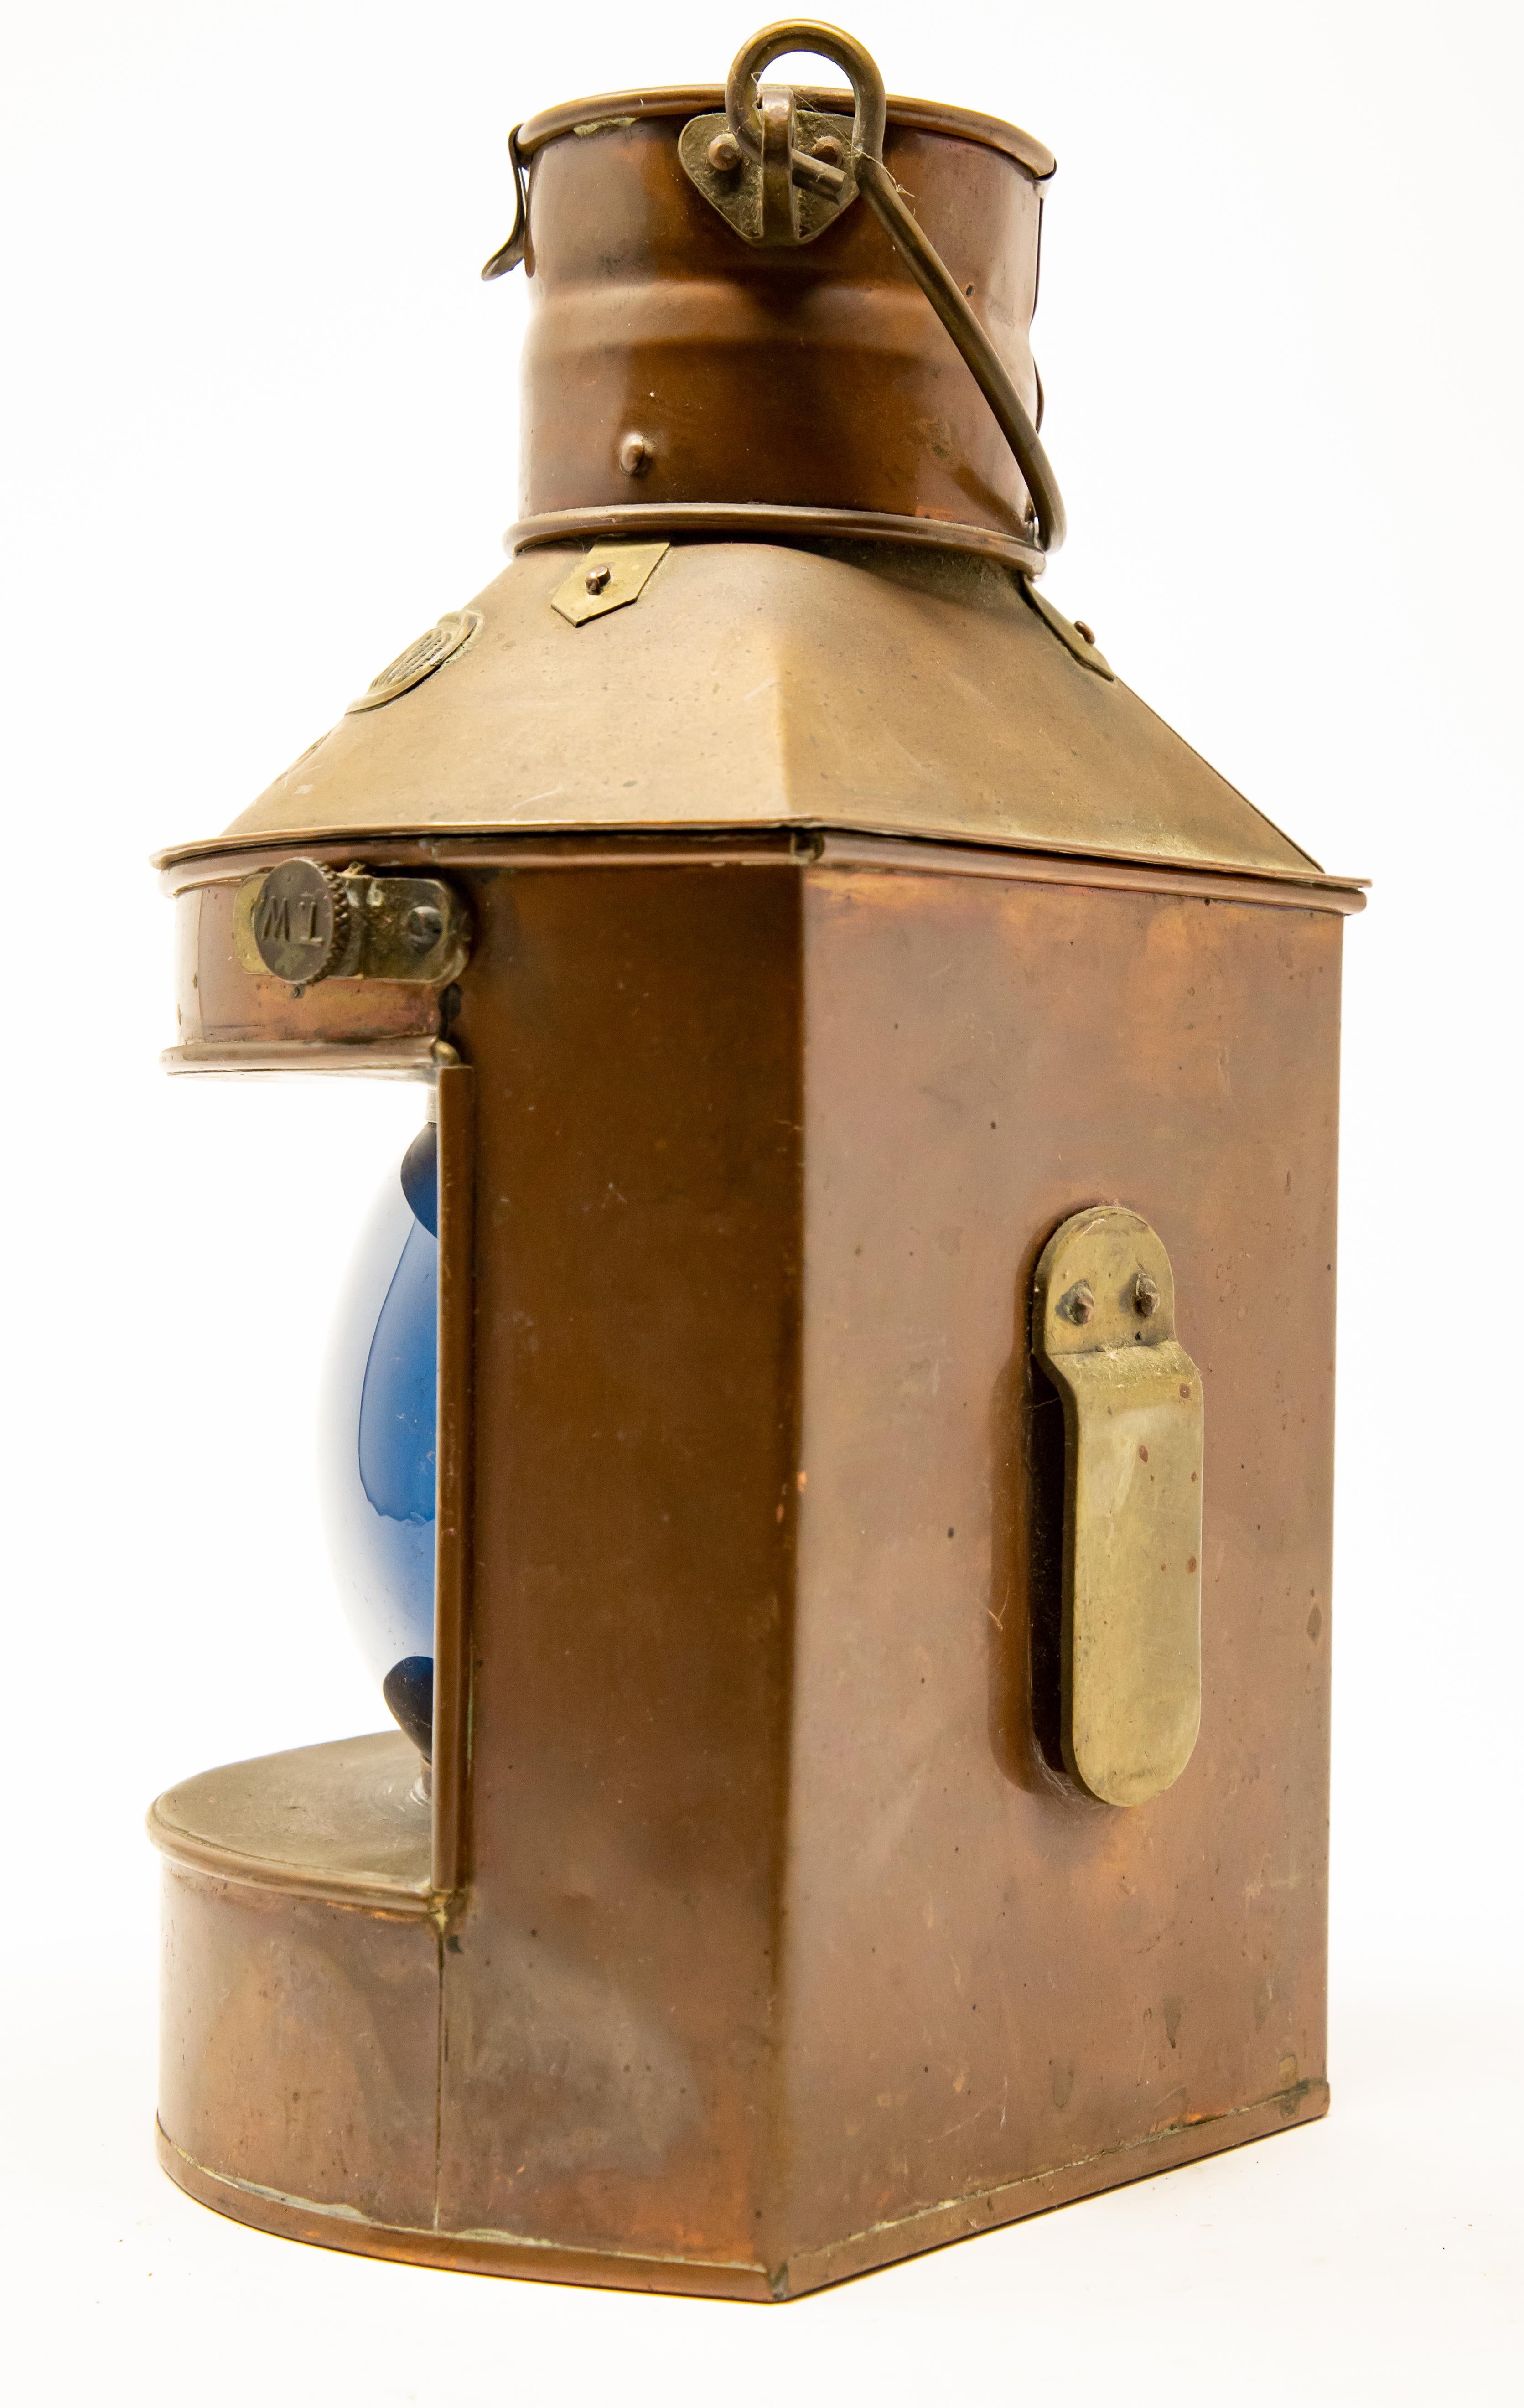 Copper Starboard Ship Lantern by Tung Woo In Fair Condition For Sale In Cookeville, TN